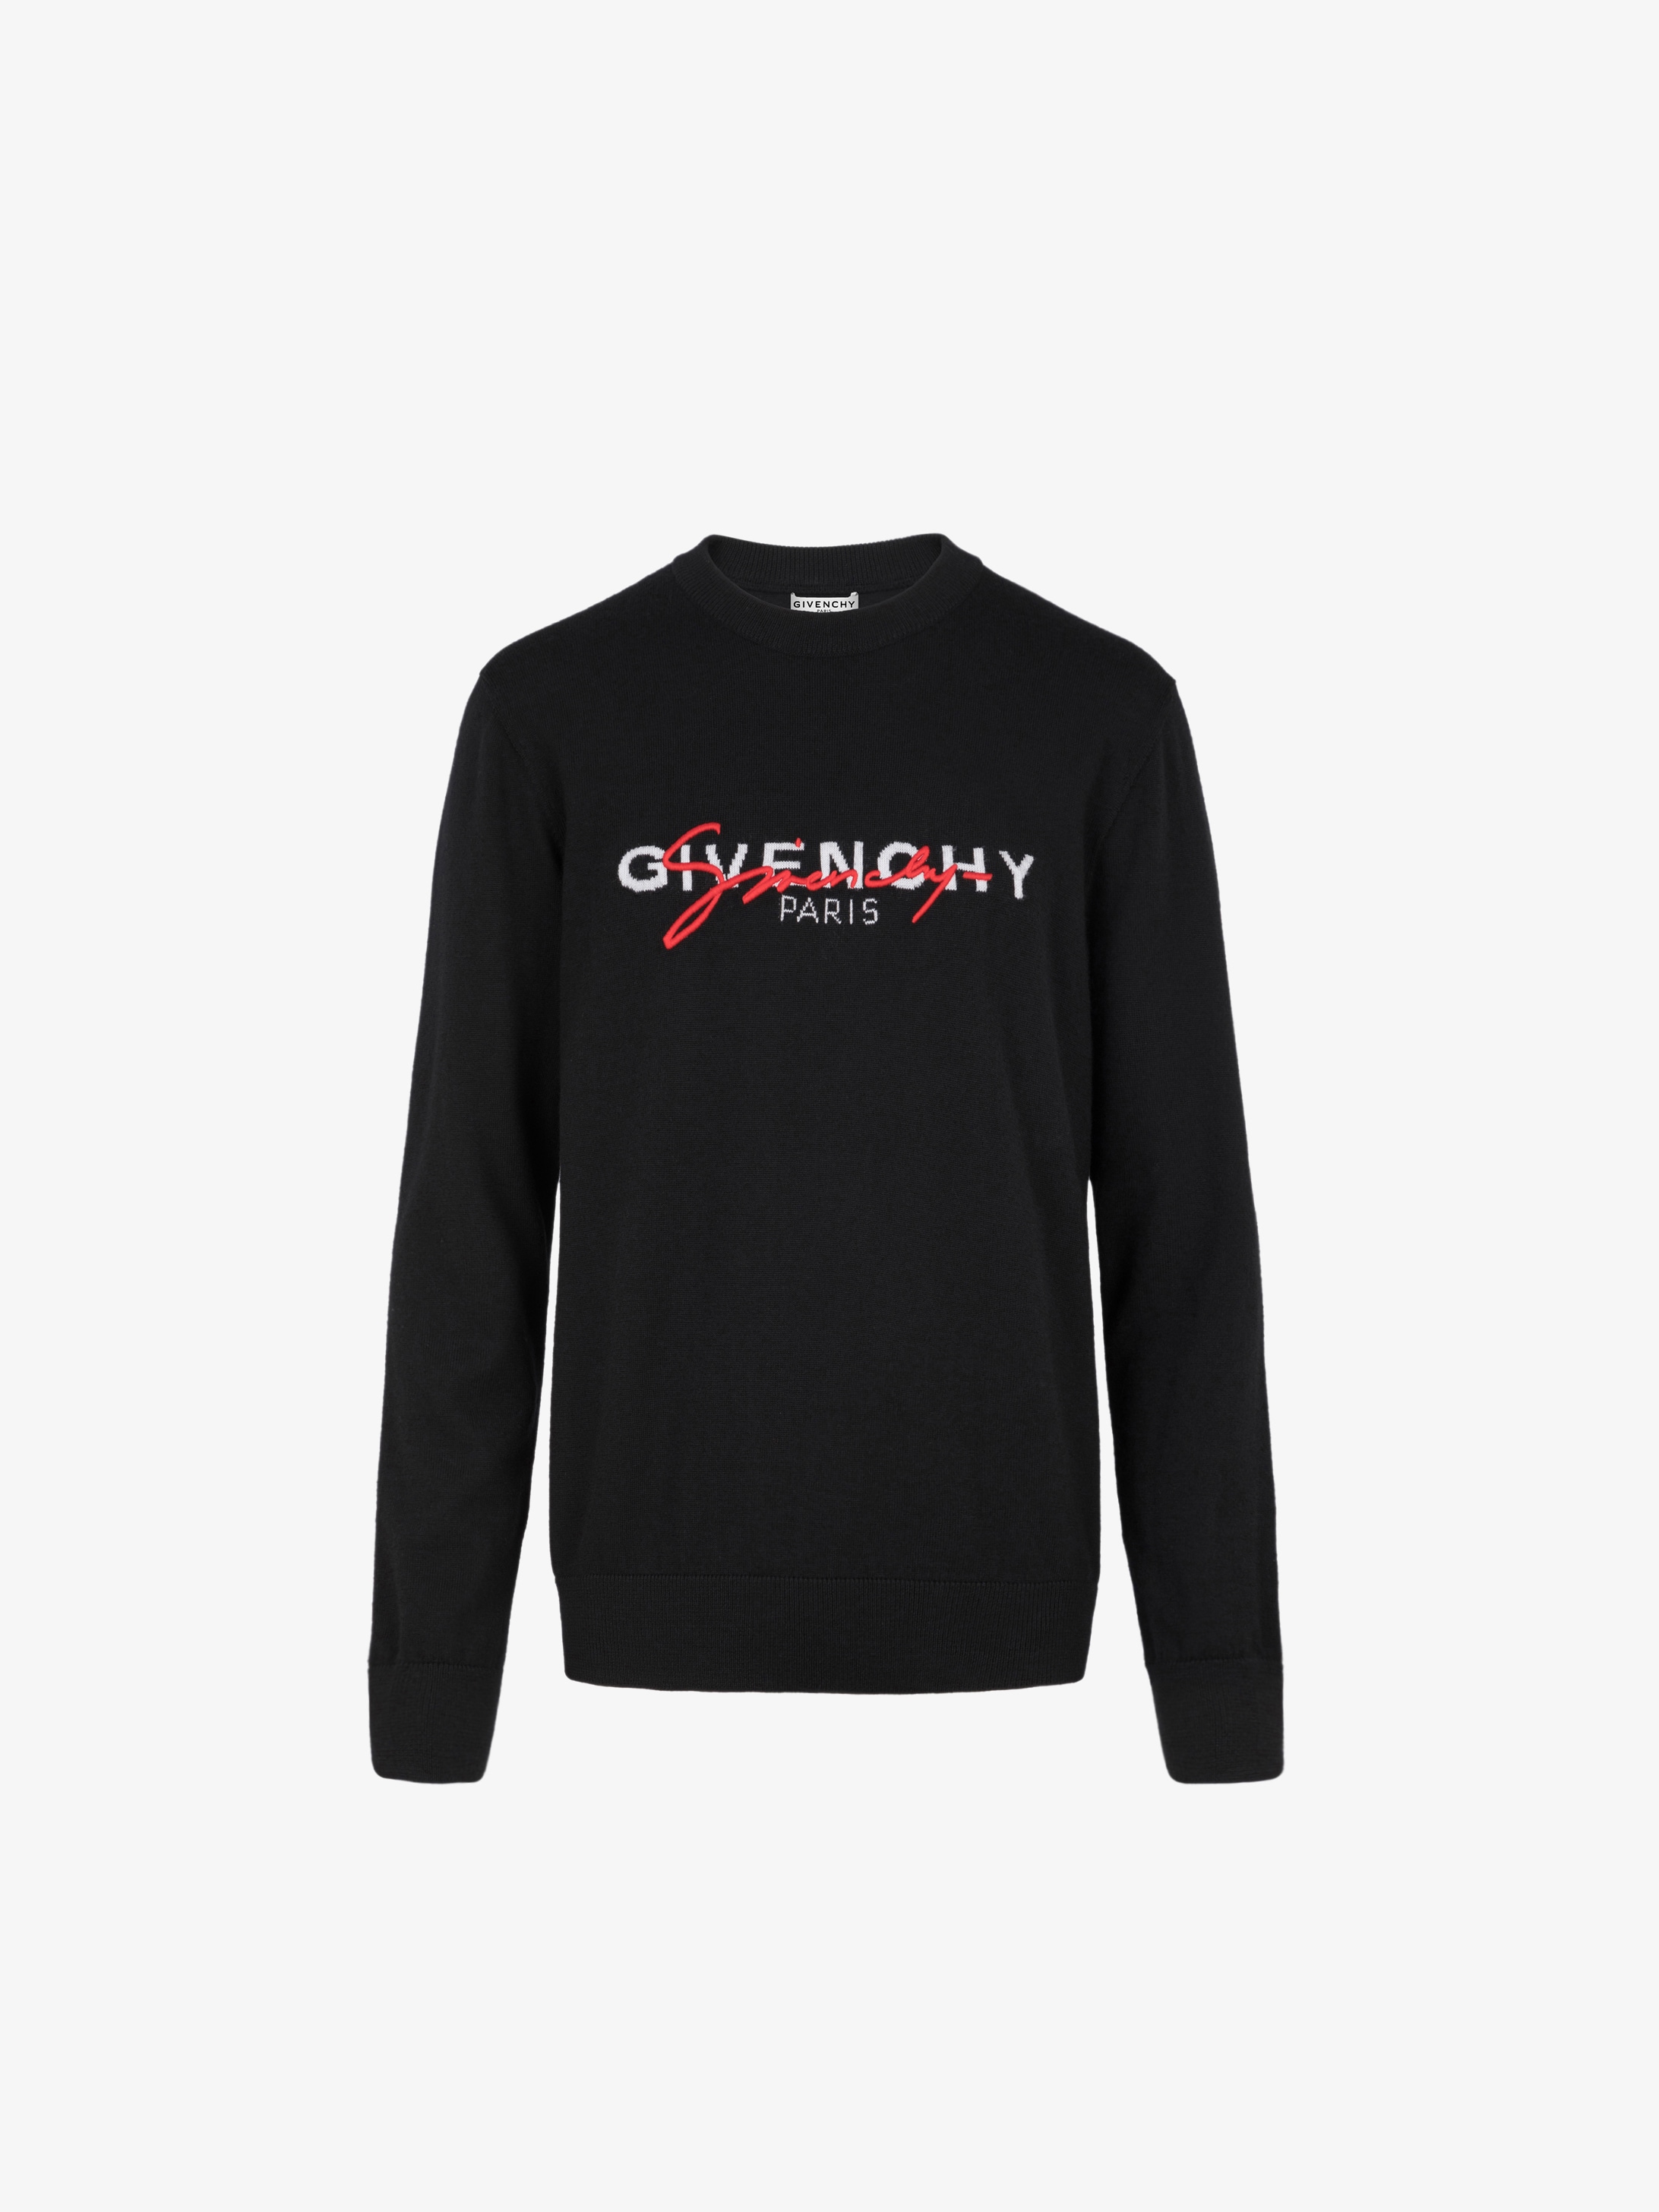 GIVENCHY sweater in jersey | GIVENCHY Paris